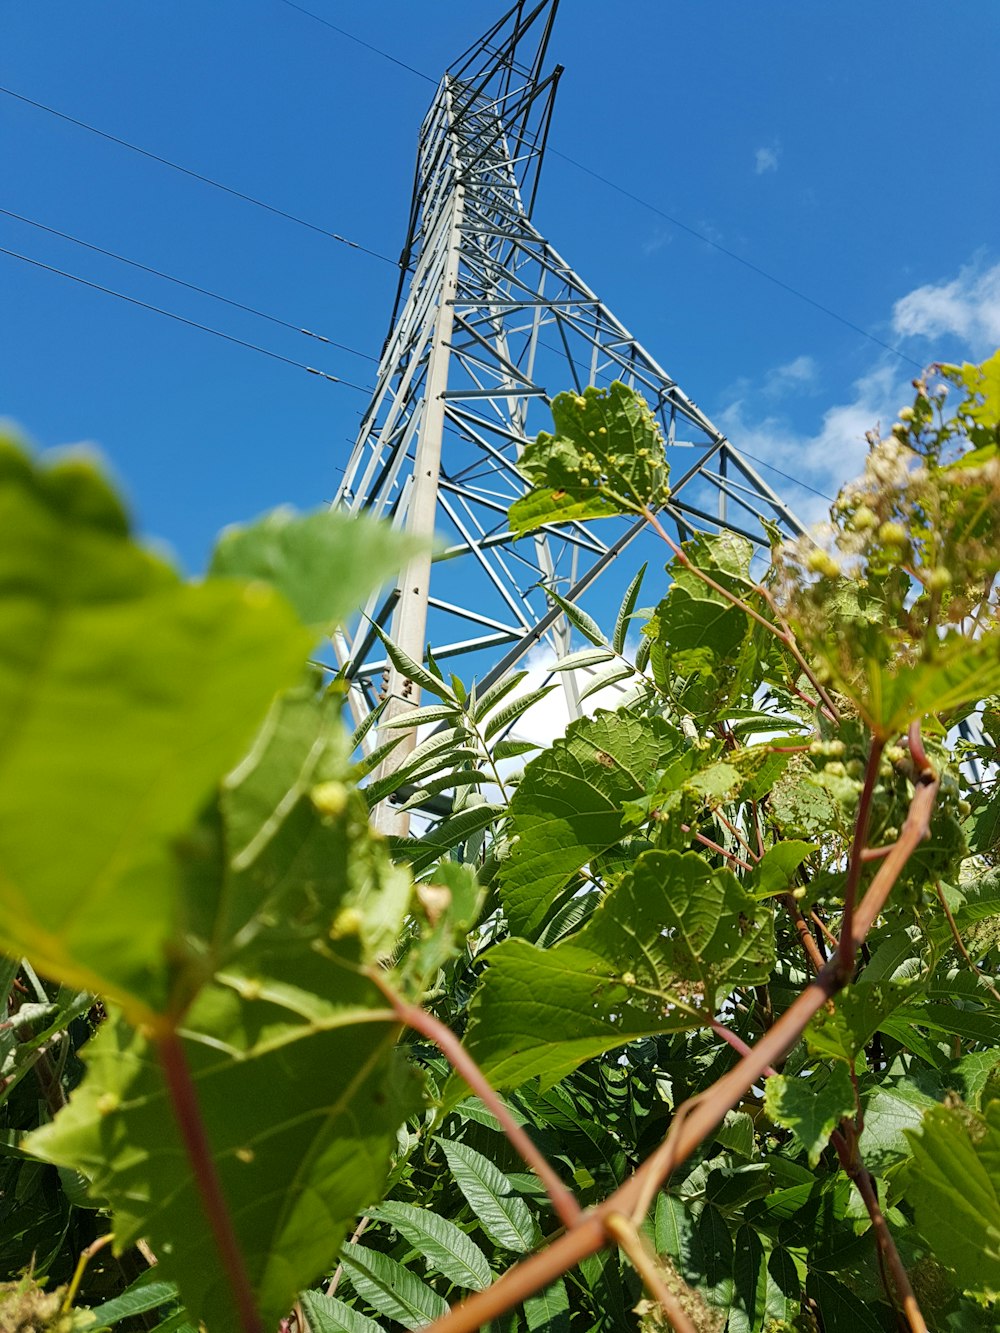 low-angle photo of green-leafed plants near gray transmission tower